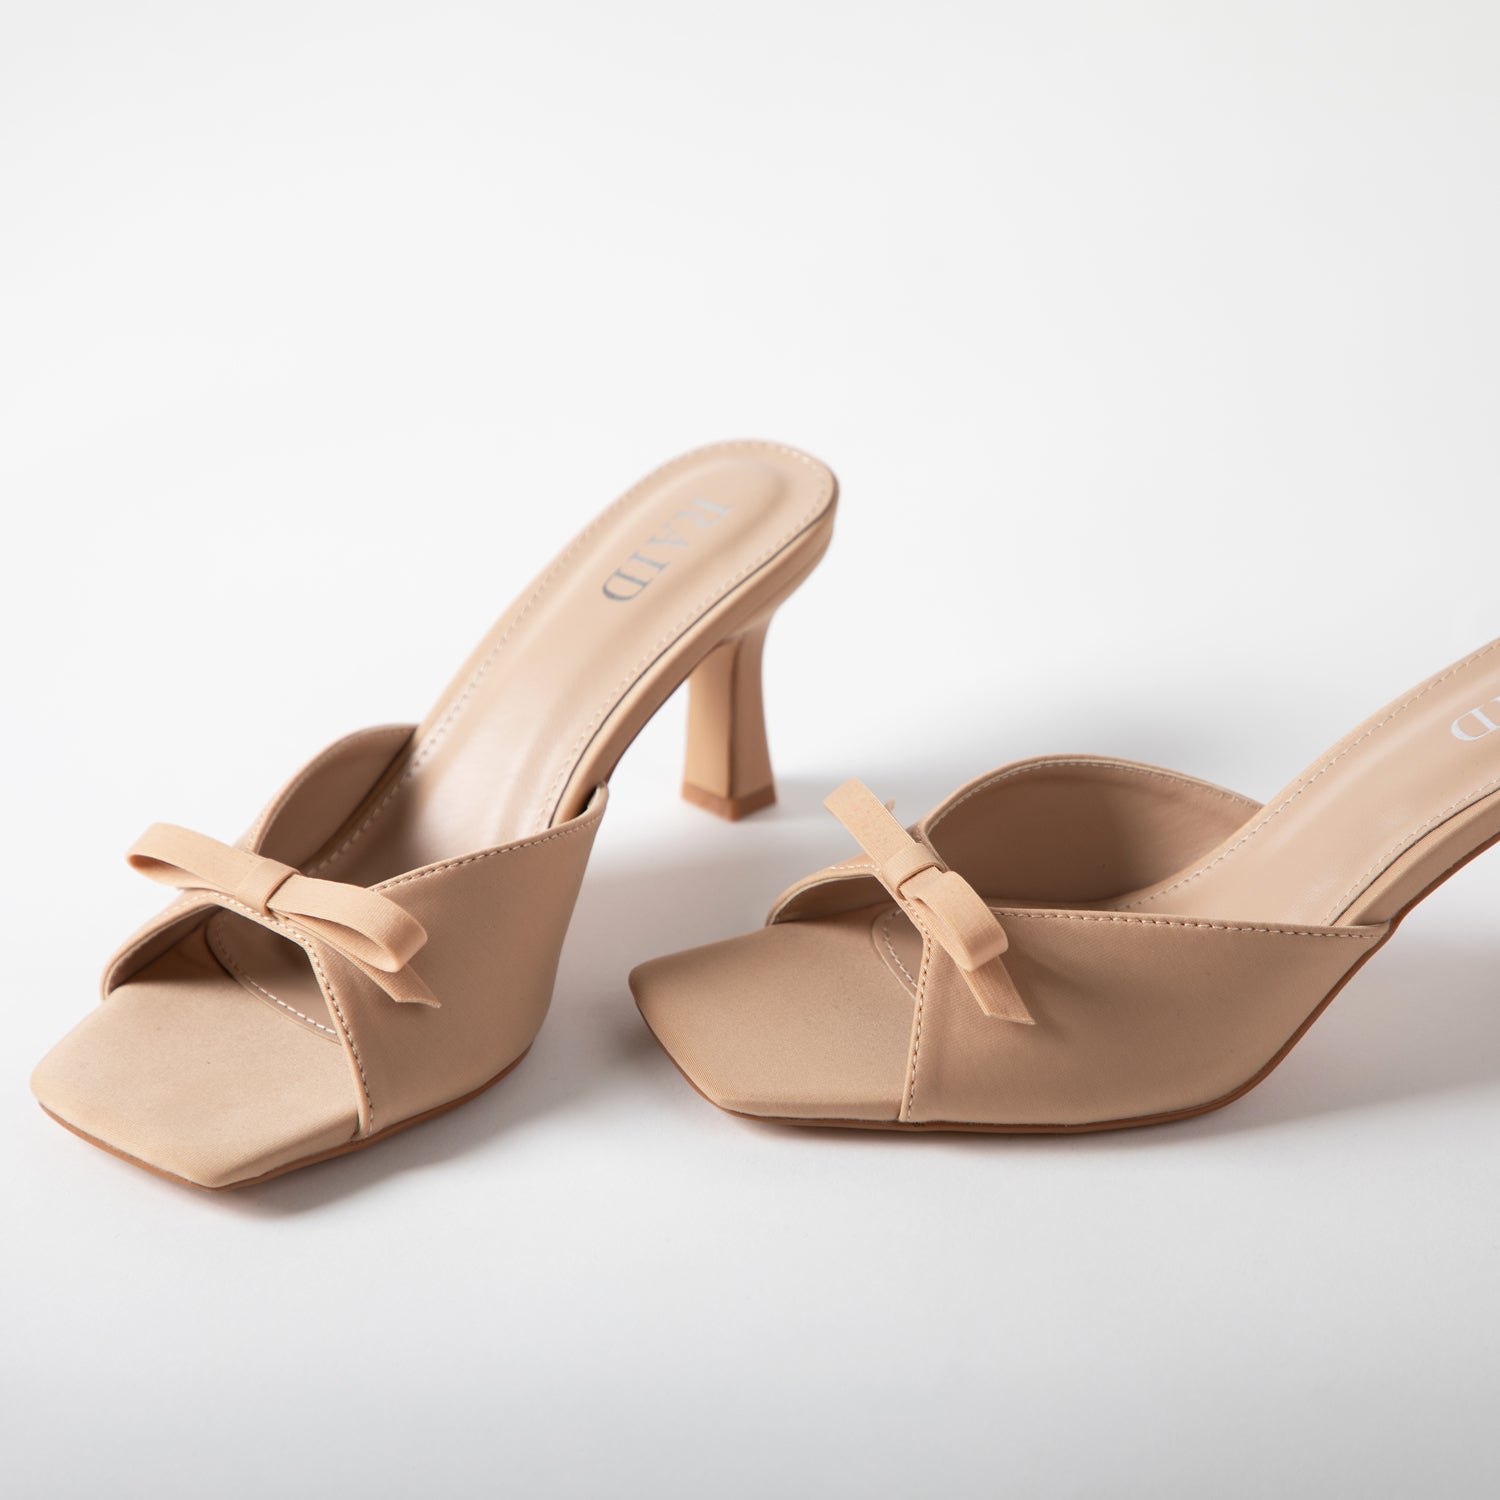 RAID Angie Heeled Mules in Nude